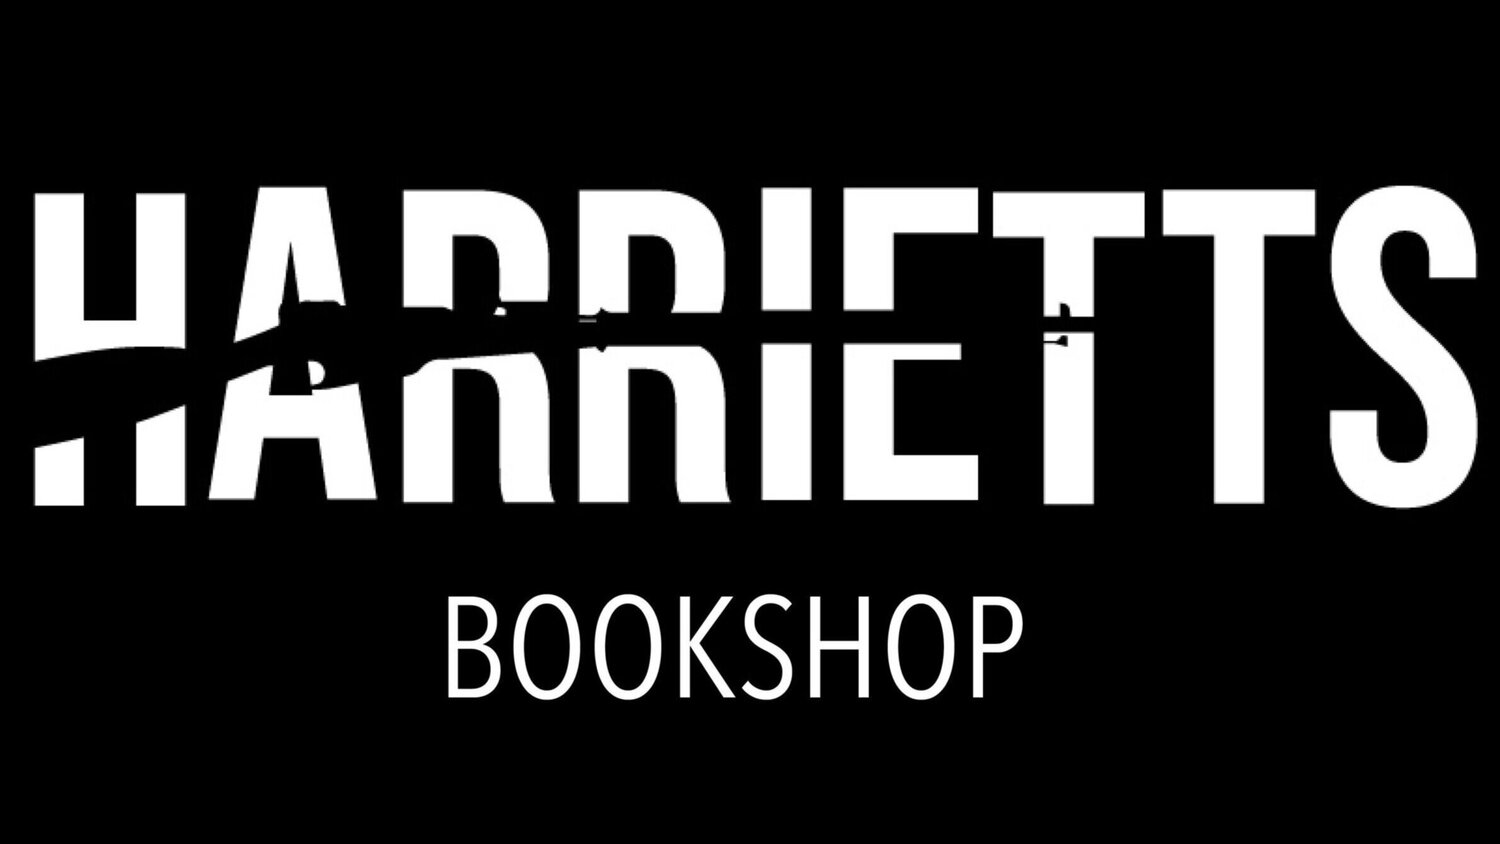 Check out Philly's Cherished Gem, Harriett's Bookshop! Click the pic to go there!